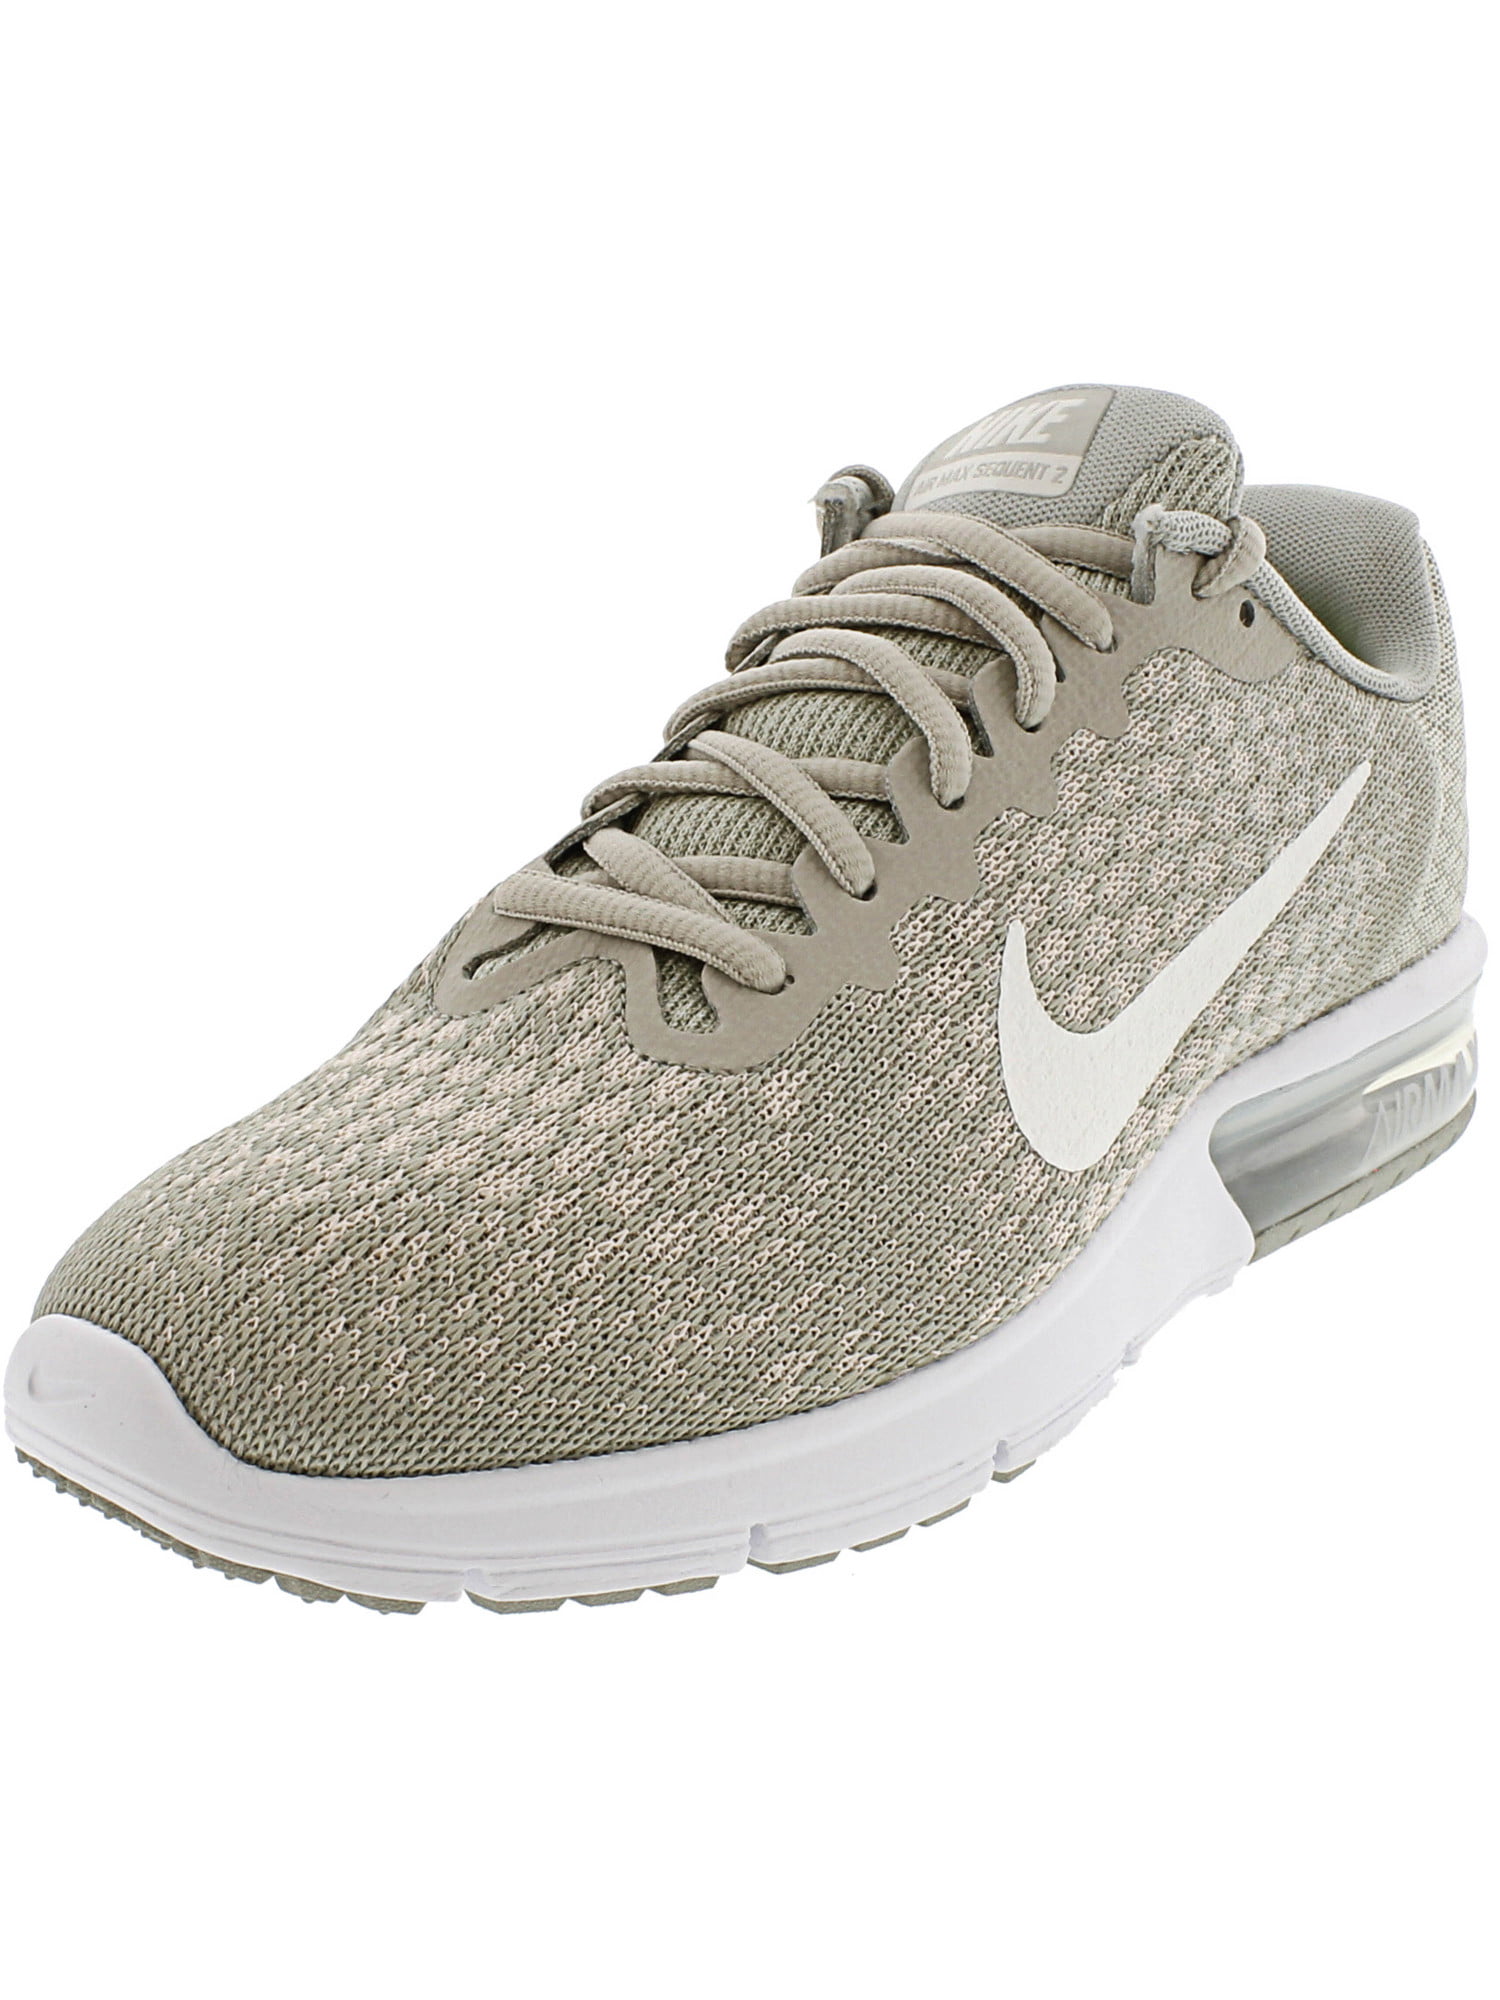 Nike Women's Air Max Sequent 2 Pale 